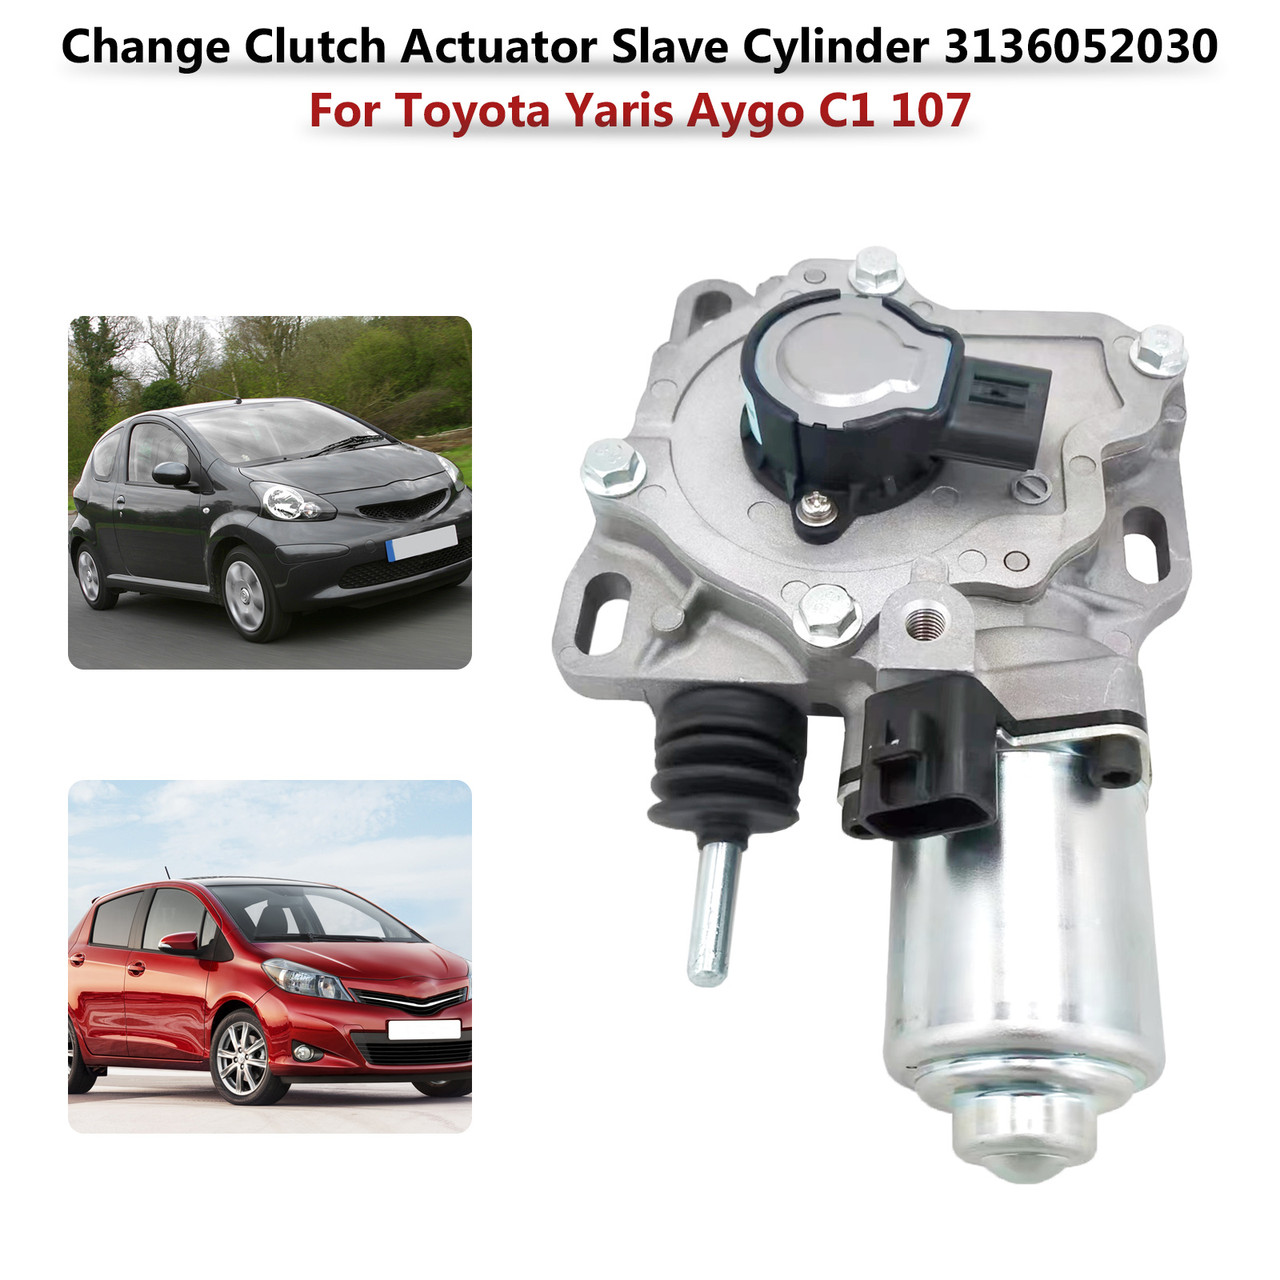 Change Clutch Actuator Slave Cylinder 3136052030 For Toyota Yaris Aygo C1  107 - MotorGenic